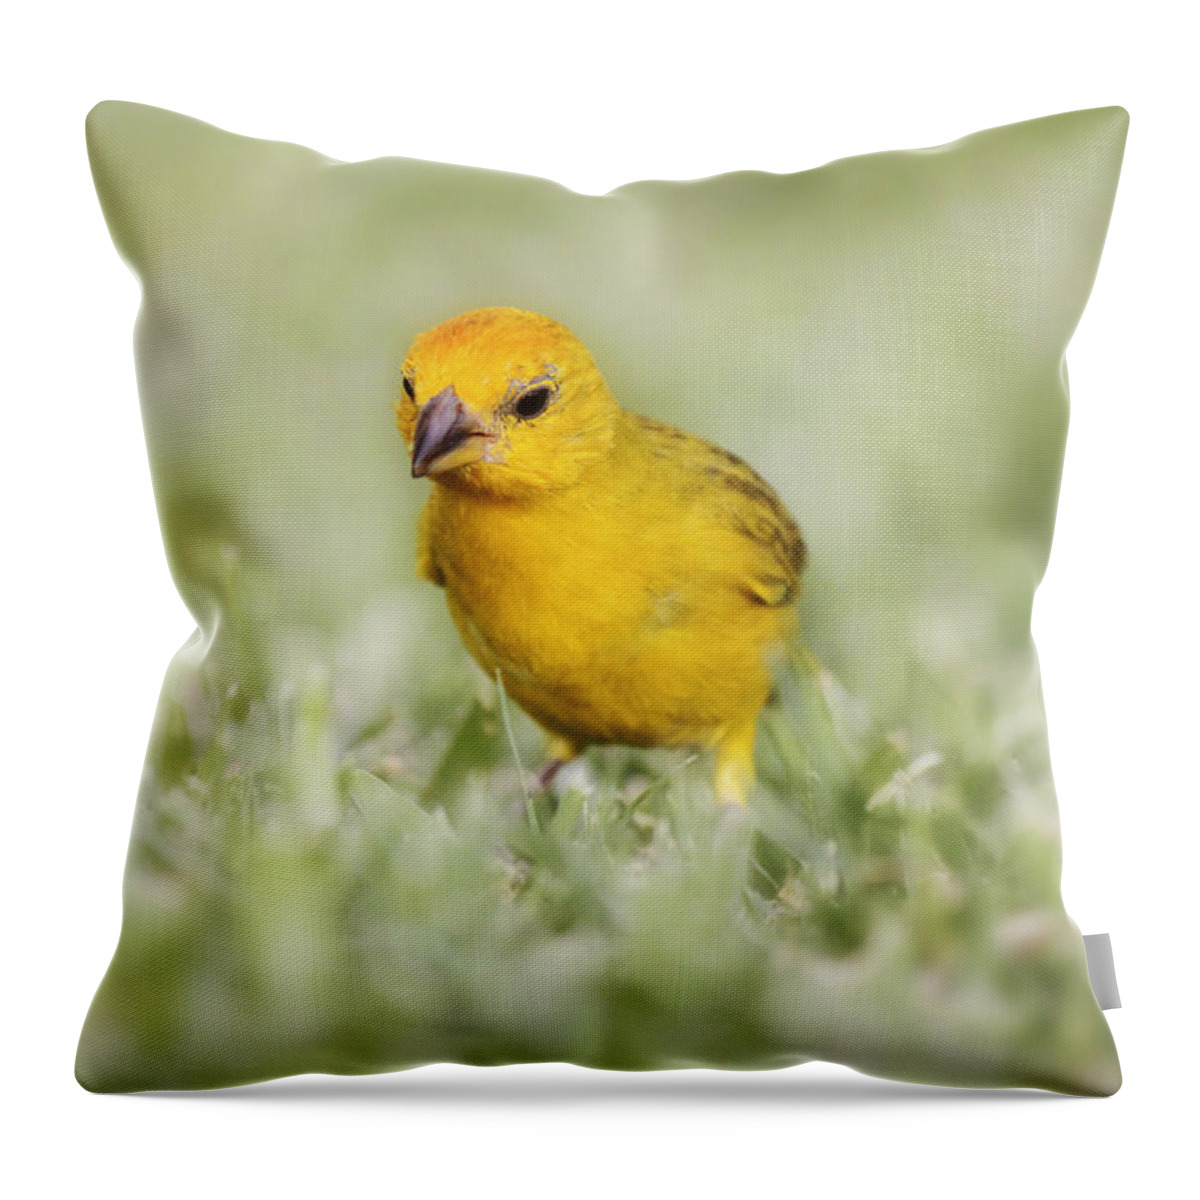 Canary Throw Pillow featuring the photograph Curiosity by Melanie Lankford Photography